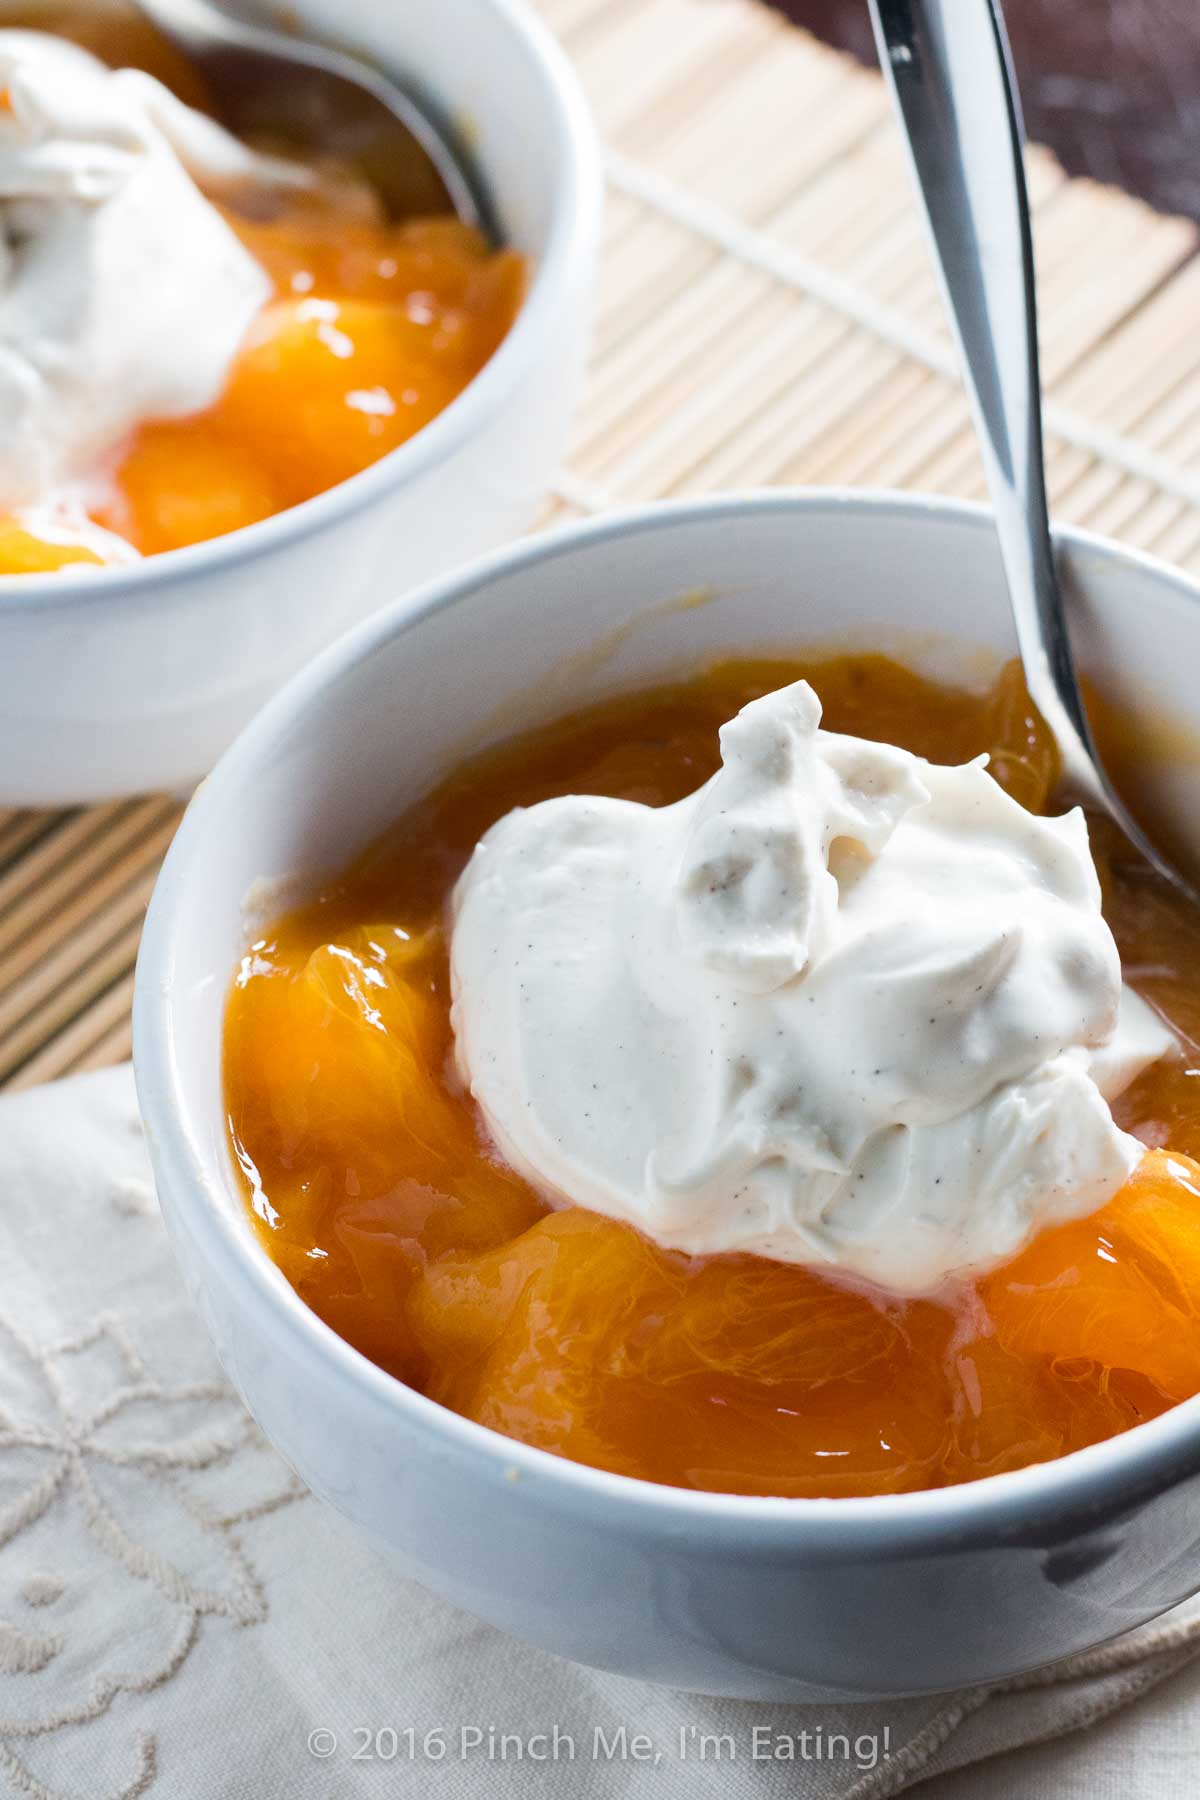 Brown Sugar Cardamom Whipped Cream with Persimmons